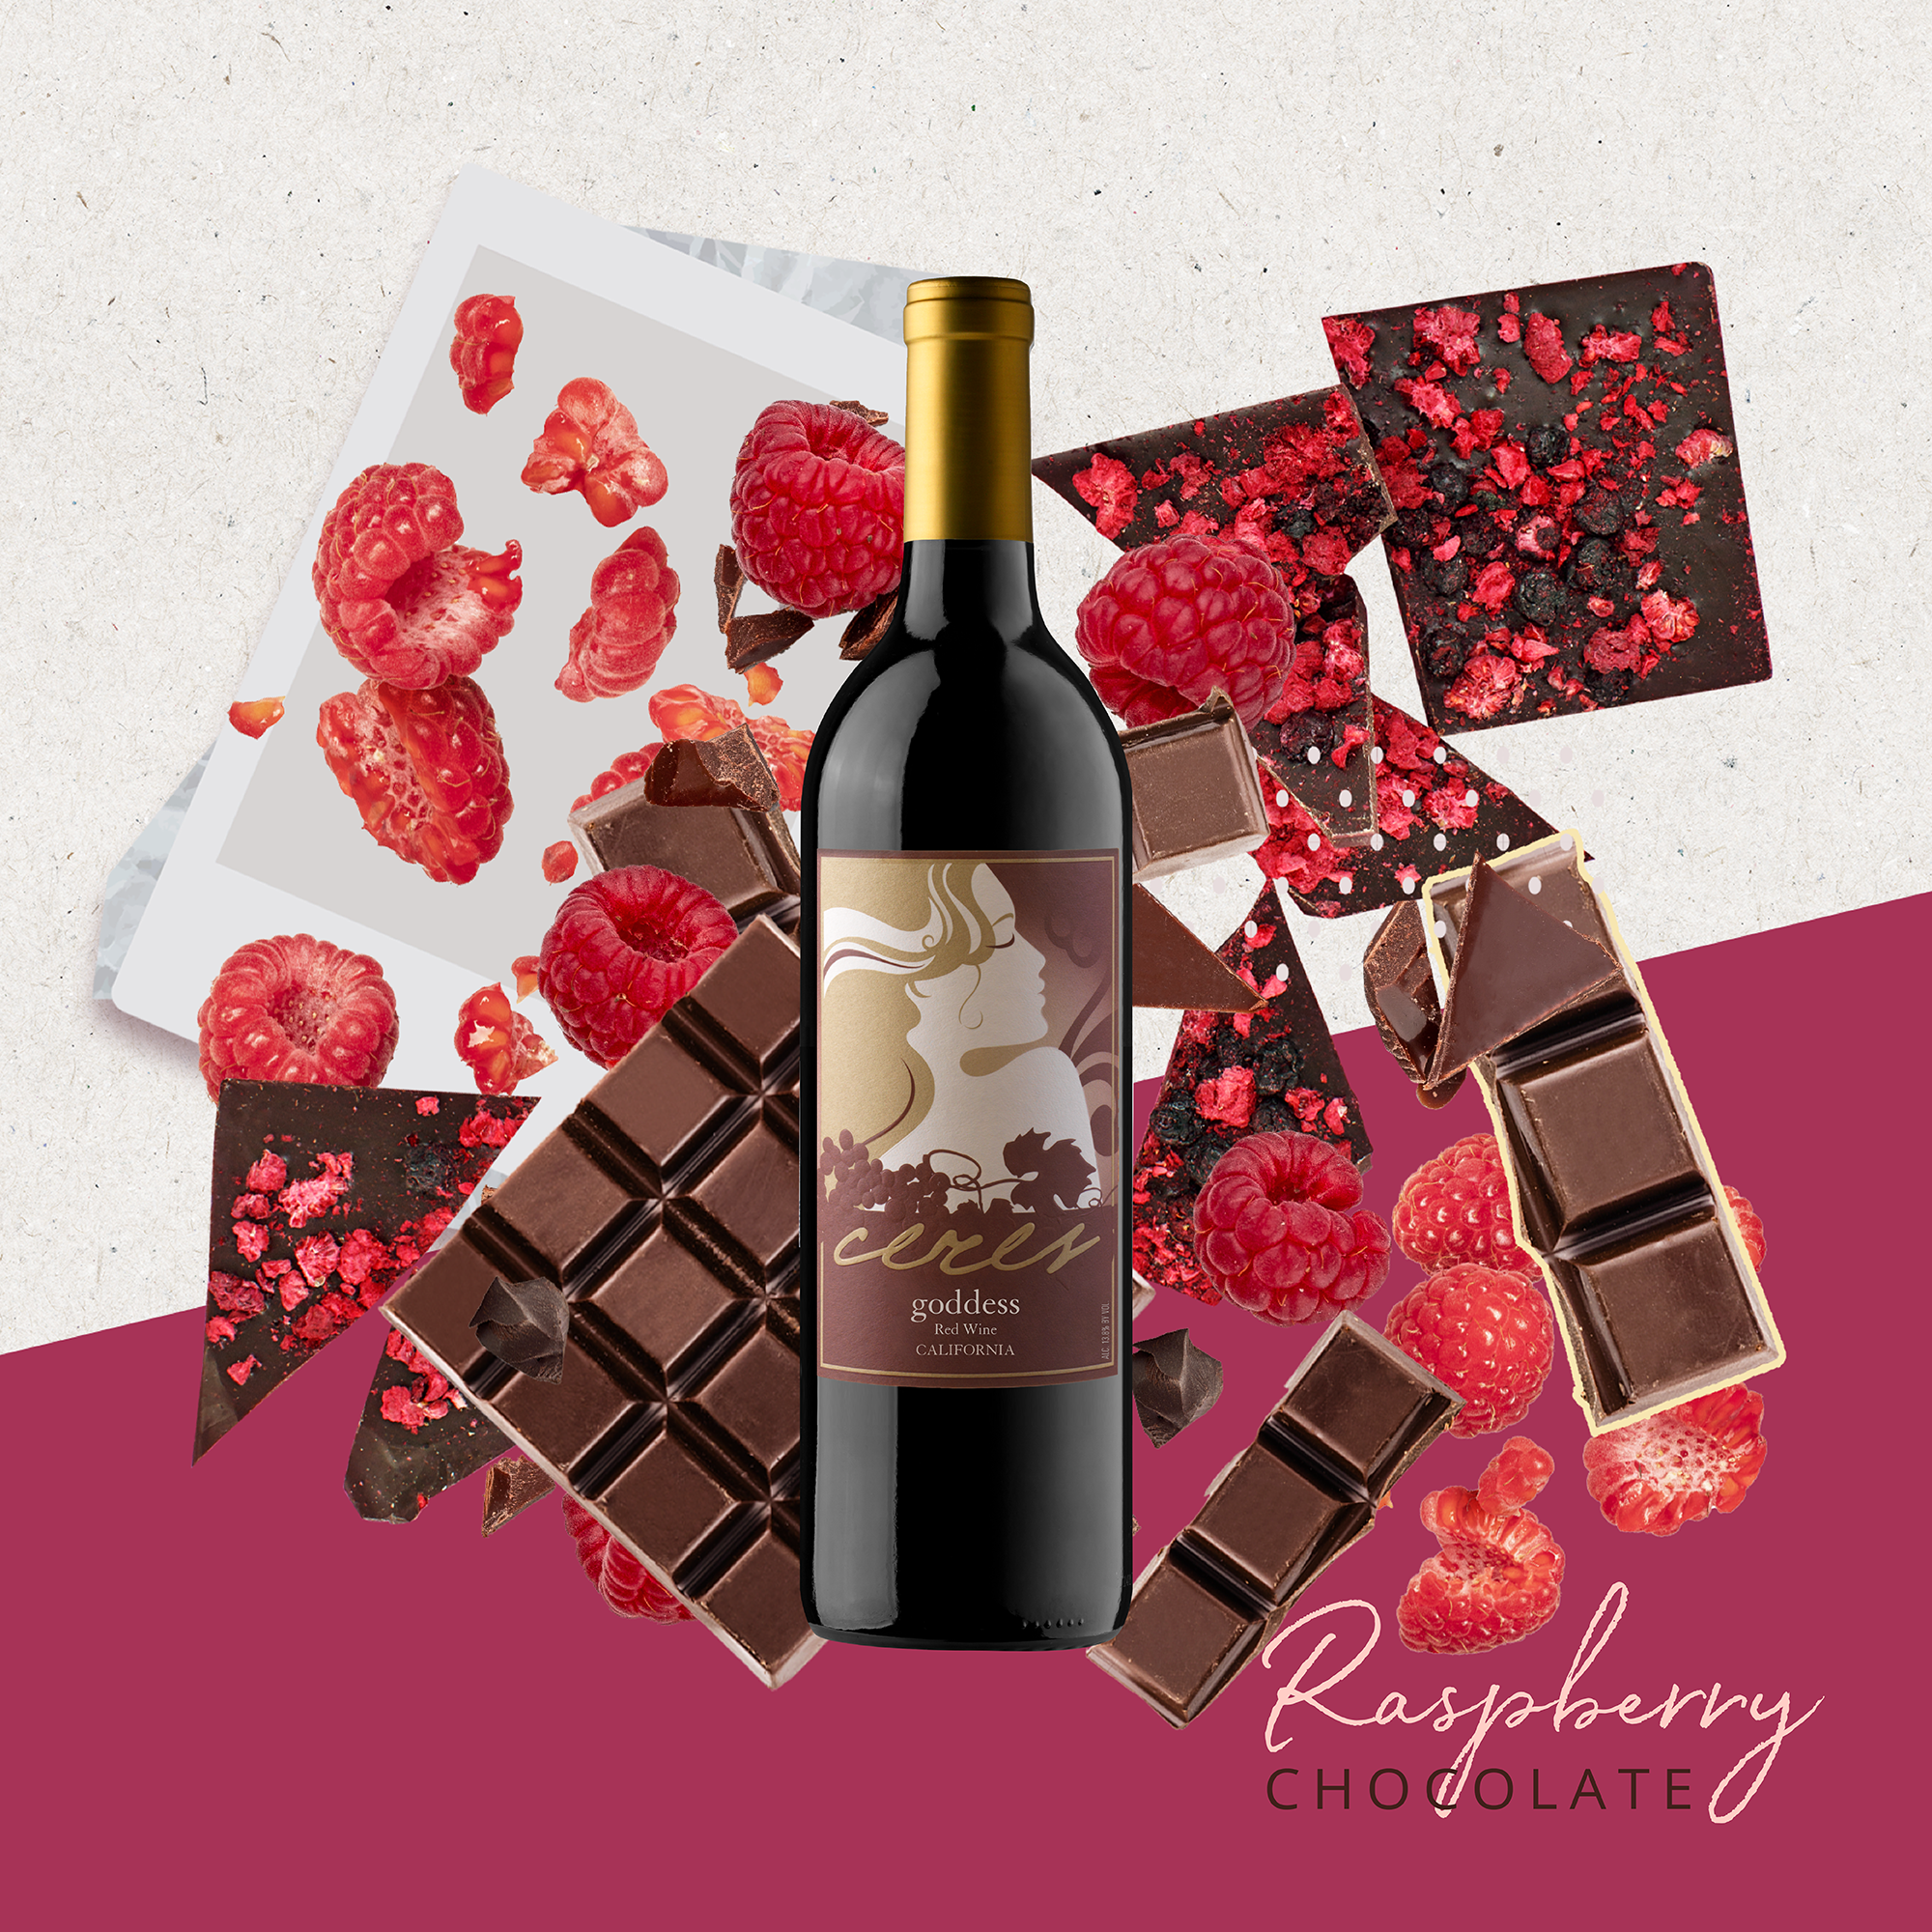 Raspberry chocolate and wine collage